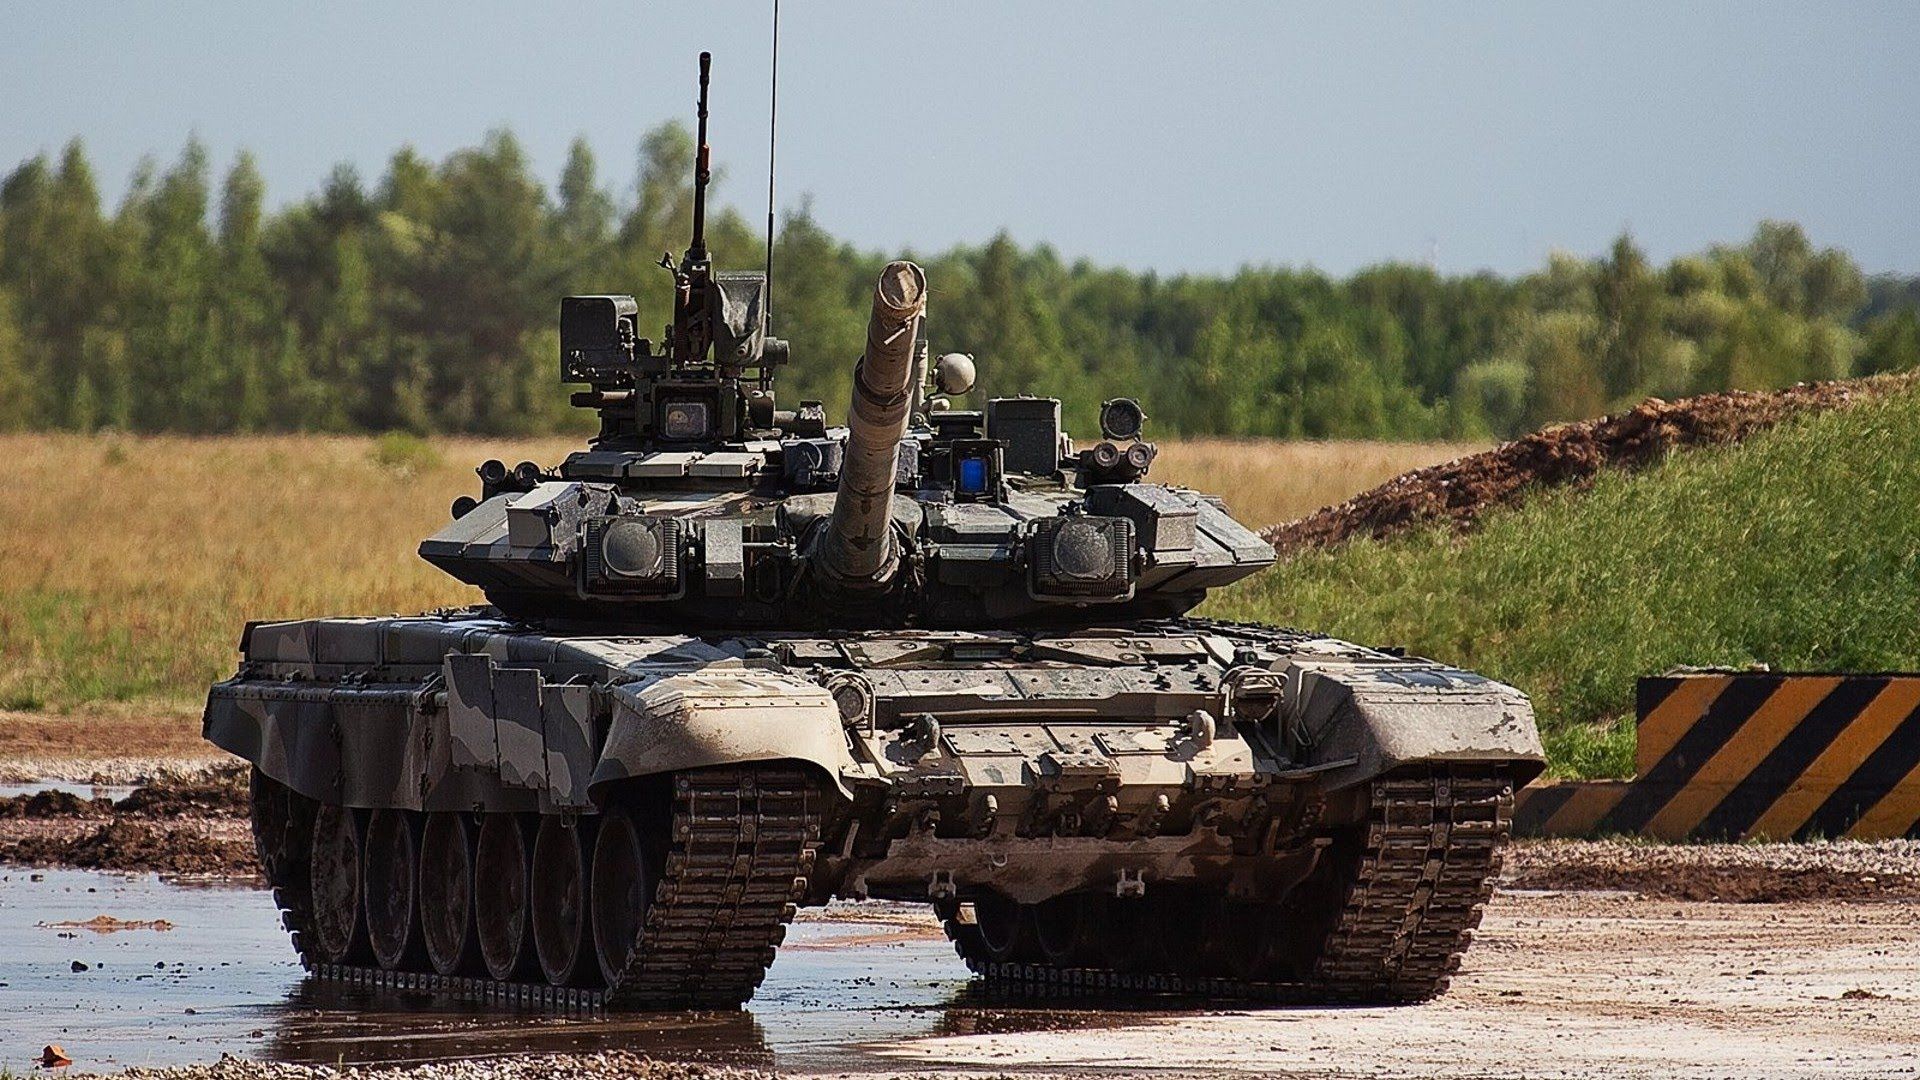 Russian Army : T-90 Super Tank in Action 2015 | HD - YouTube